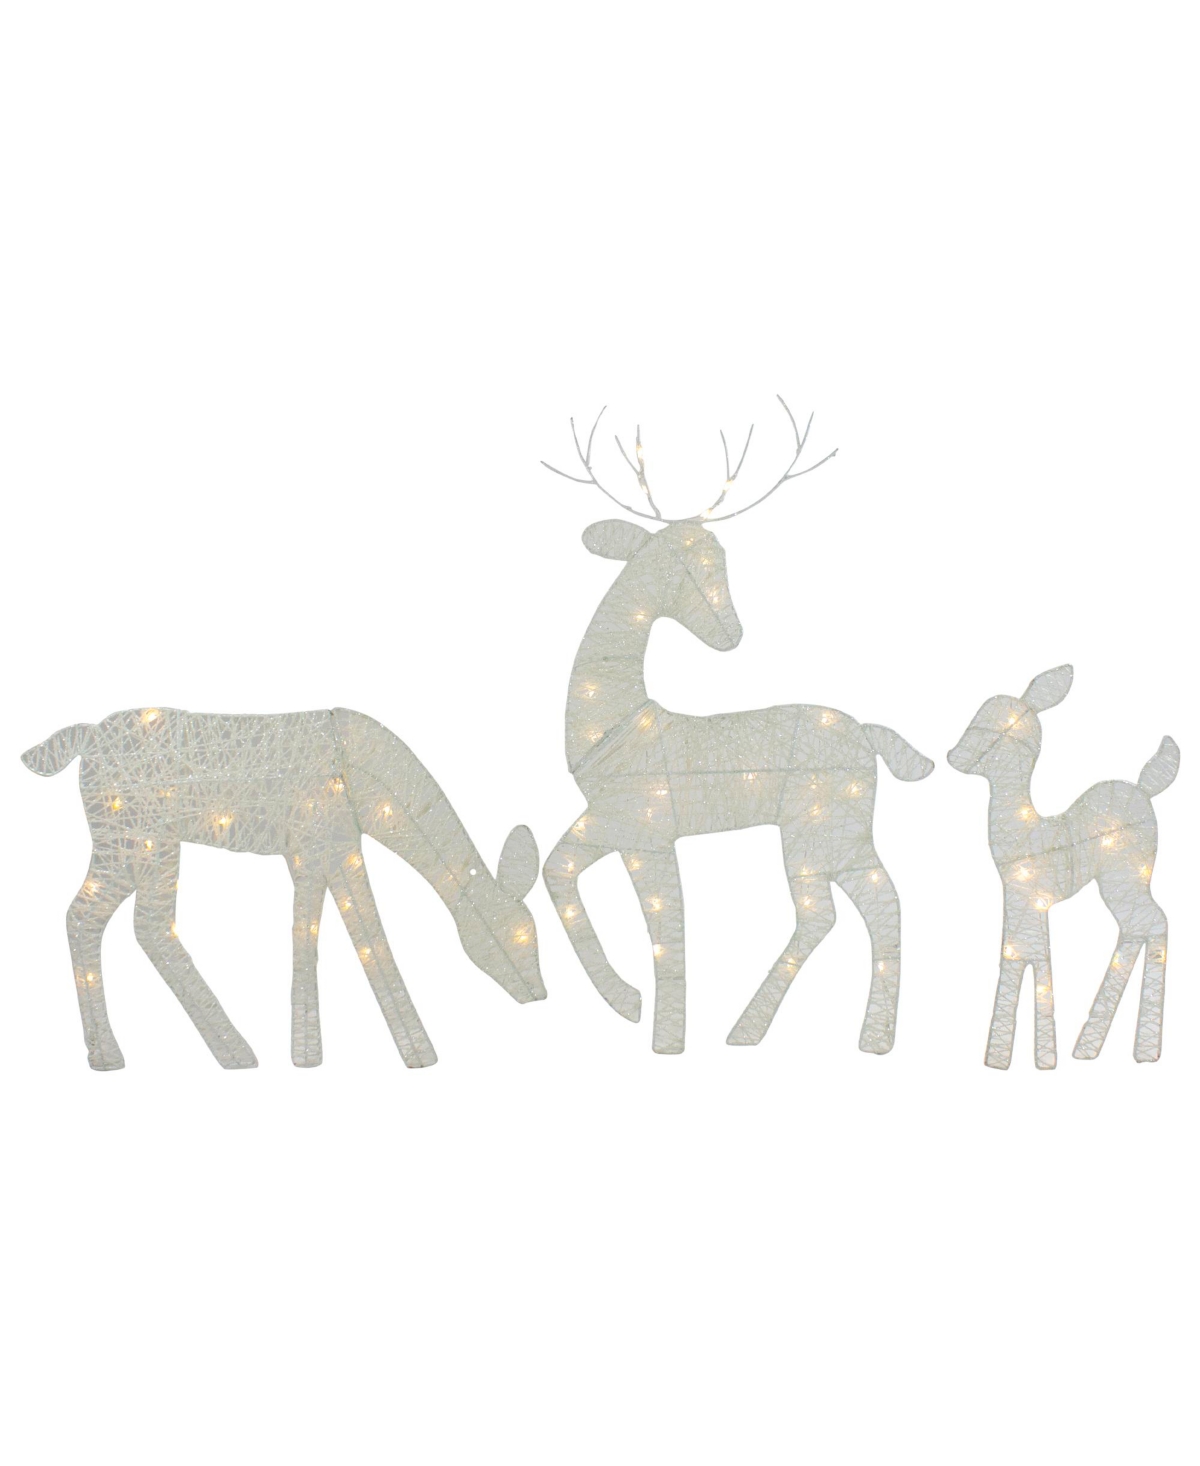 Northlight 29" Led Lighted Reindeer Family Outdoor Christmas Decorations, Set Of 3 In White